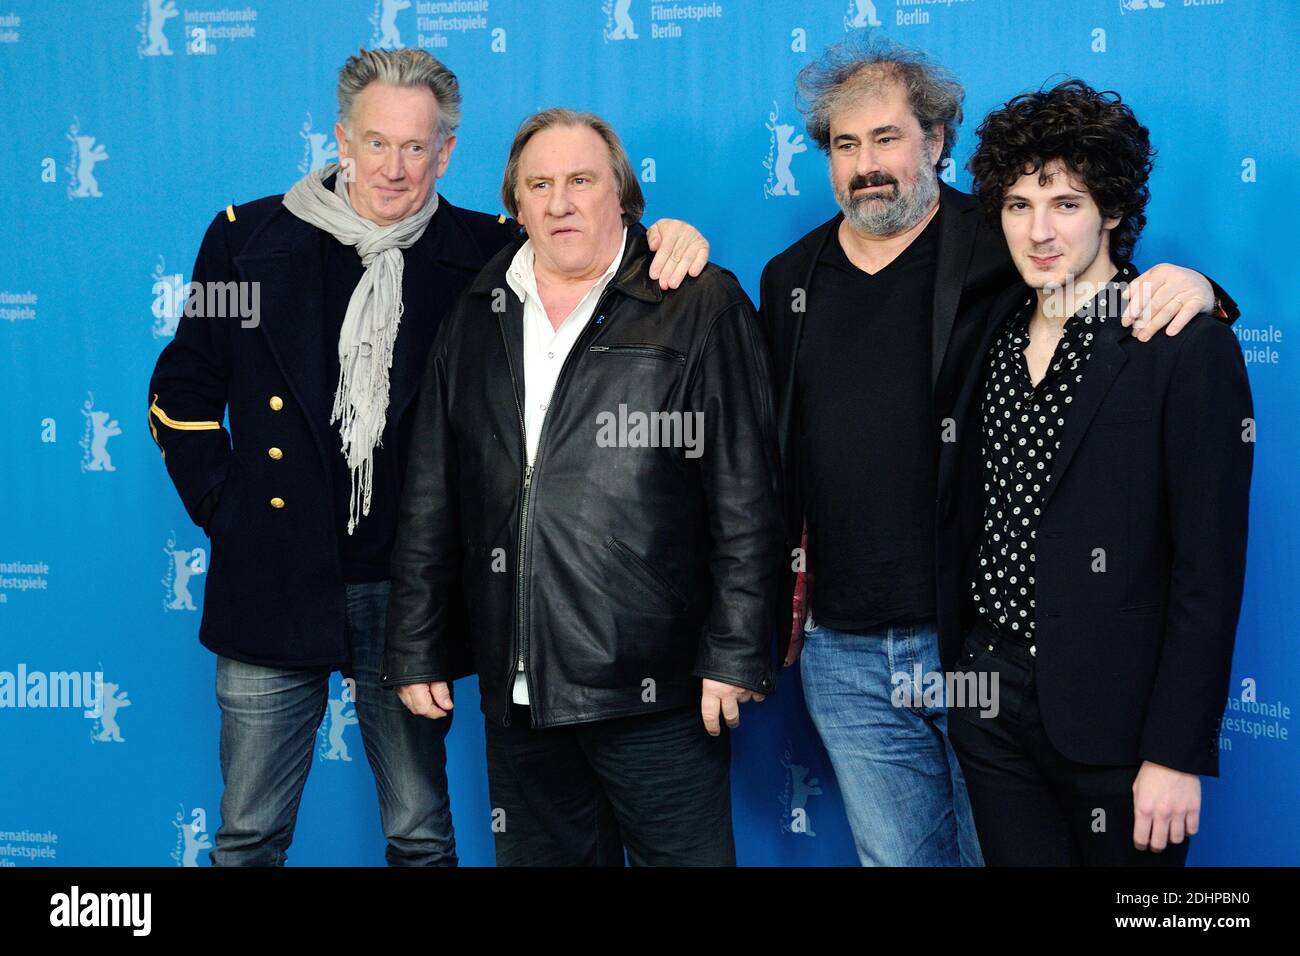 Benoit Gerard Depardieu, Gustave Kervern and Vincent Lacoste attending the 'Saint-Amour' Photocall during the 66th Berlin International Film Festival in Berlin, Germany on February 19, 2016. Photo by Aurore Marechal/ABACAPRESS.COM